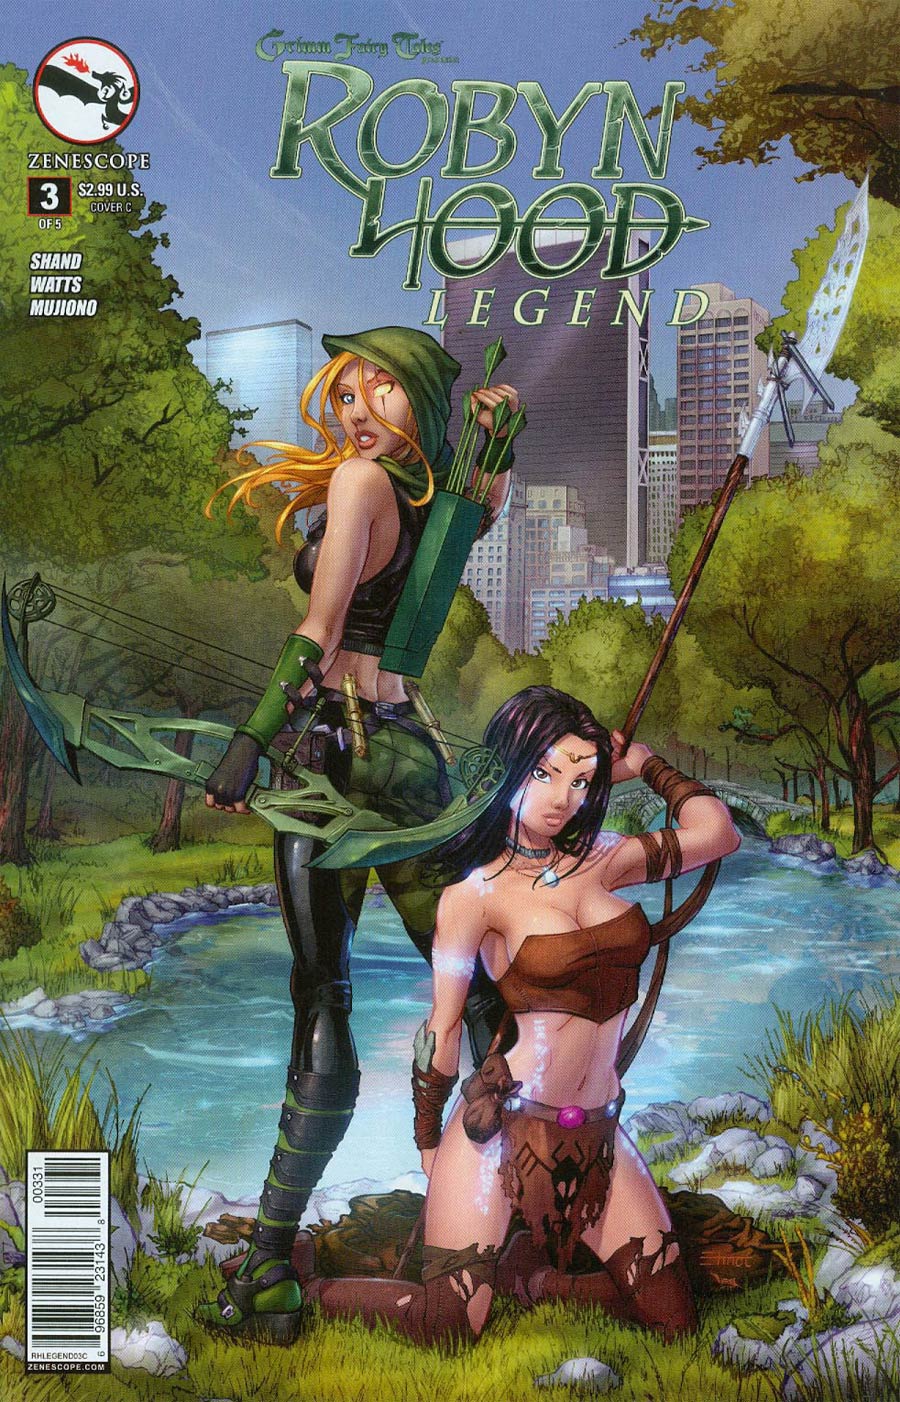 Grimm Fairy Tales Presents Robyn Hood Legend #3 Cover C Chris Ehnot